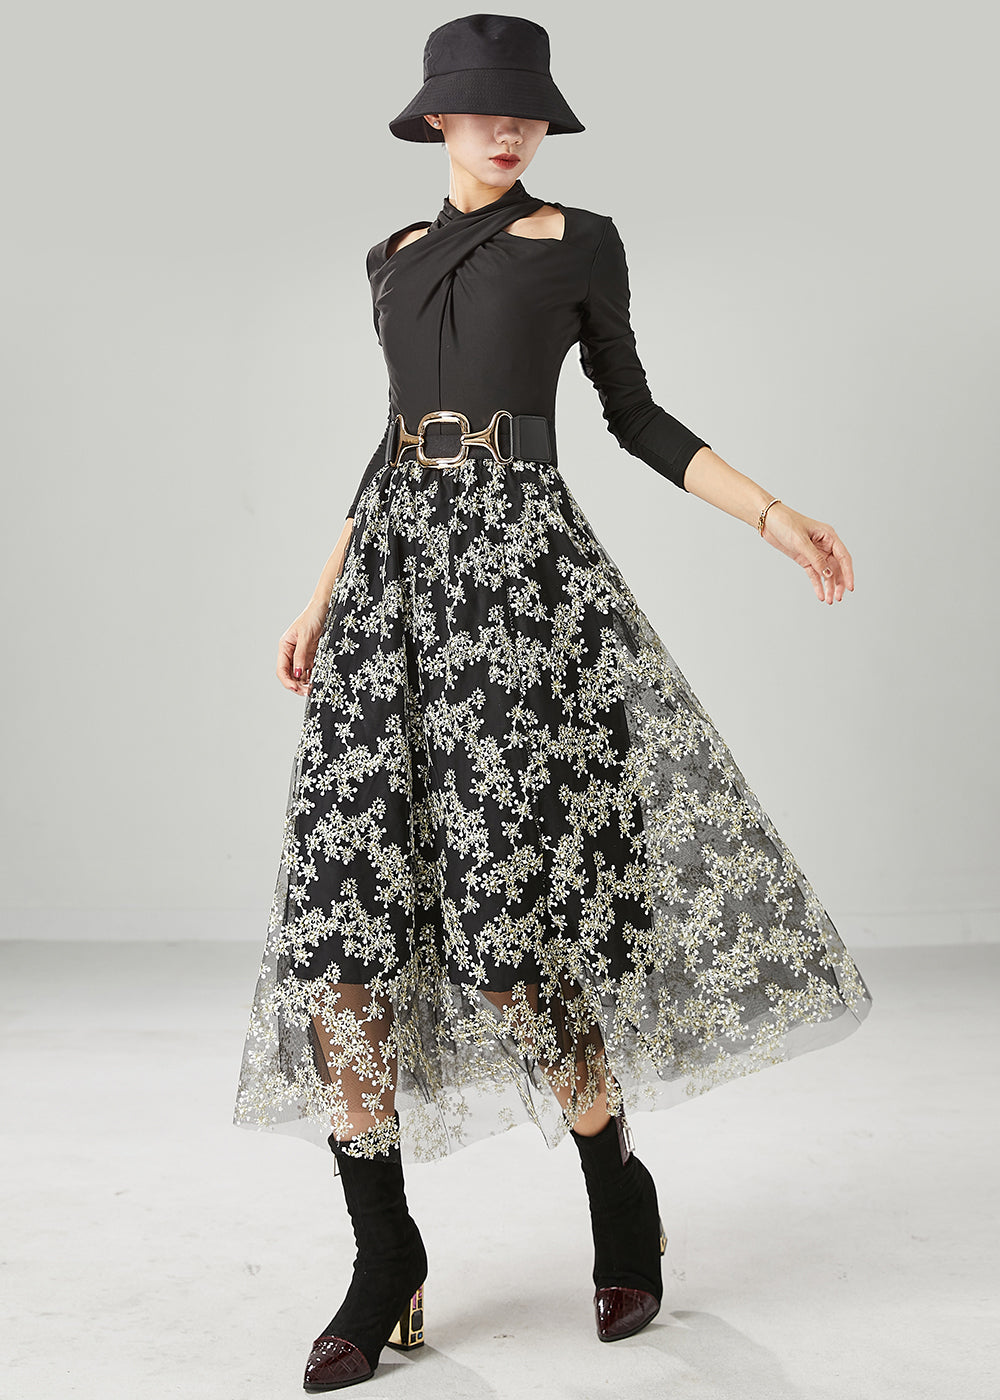 Stylish Black Embroideried Tulle Skirt Summer